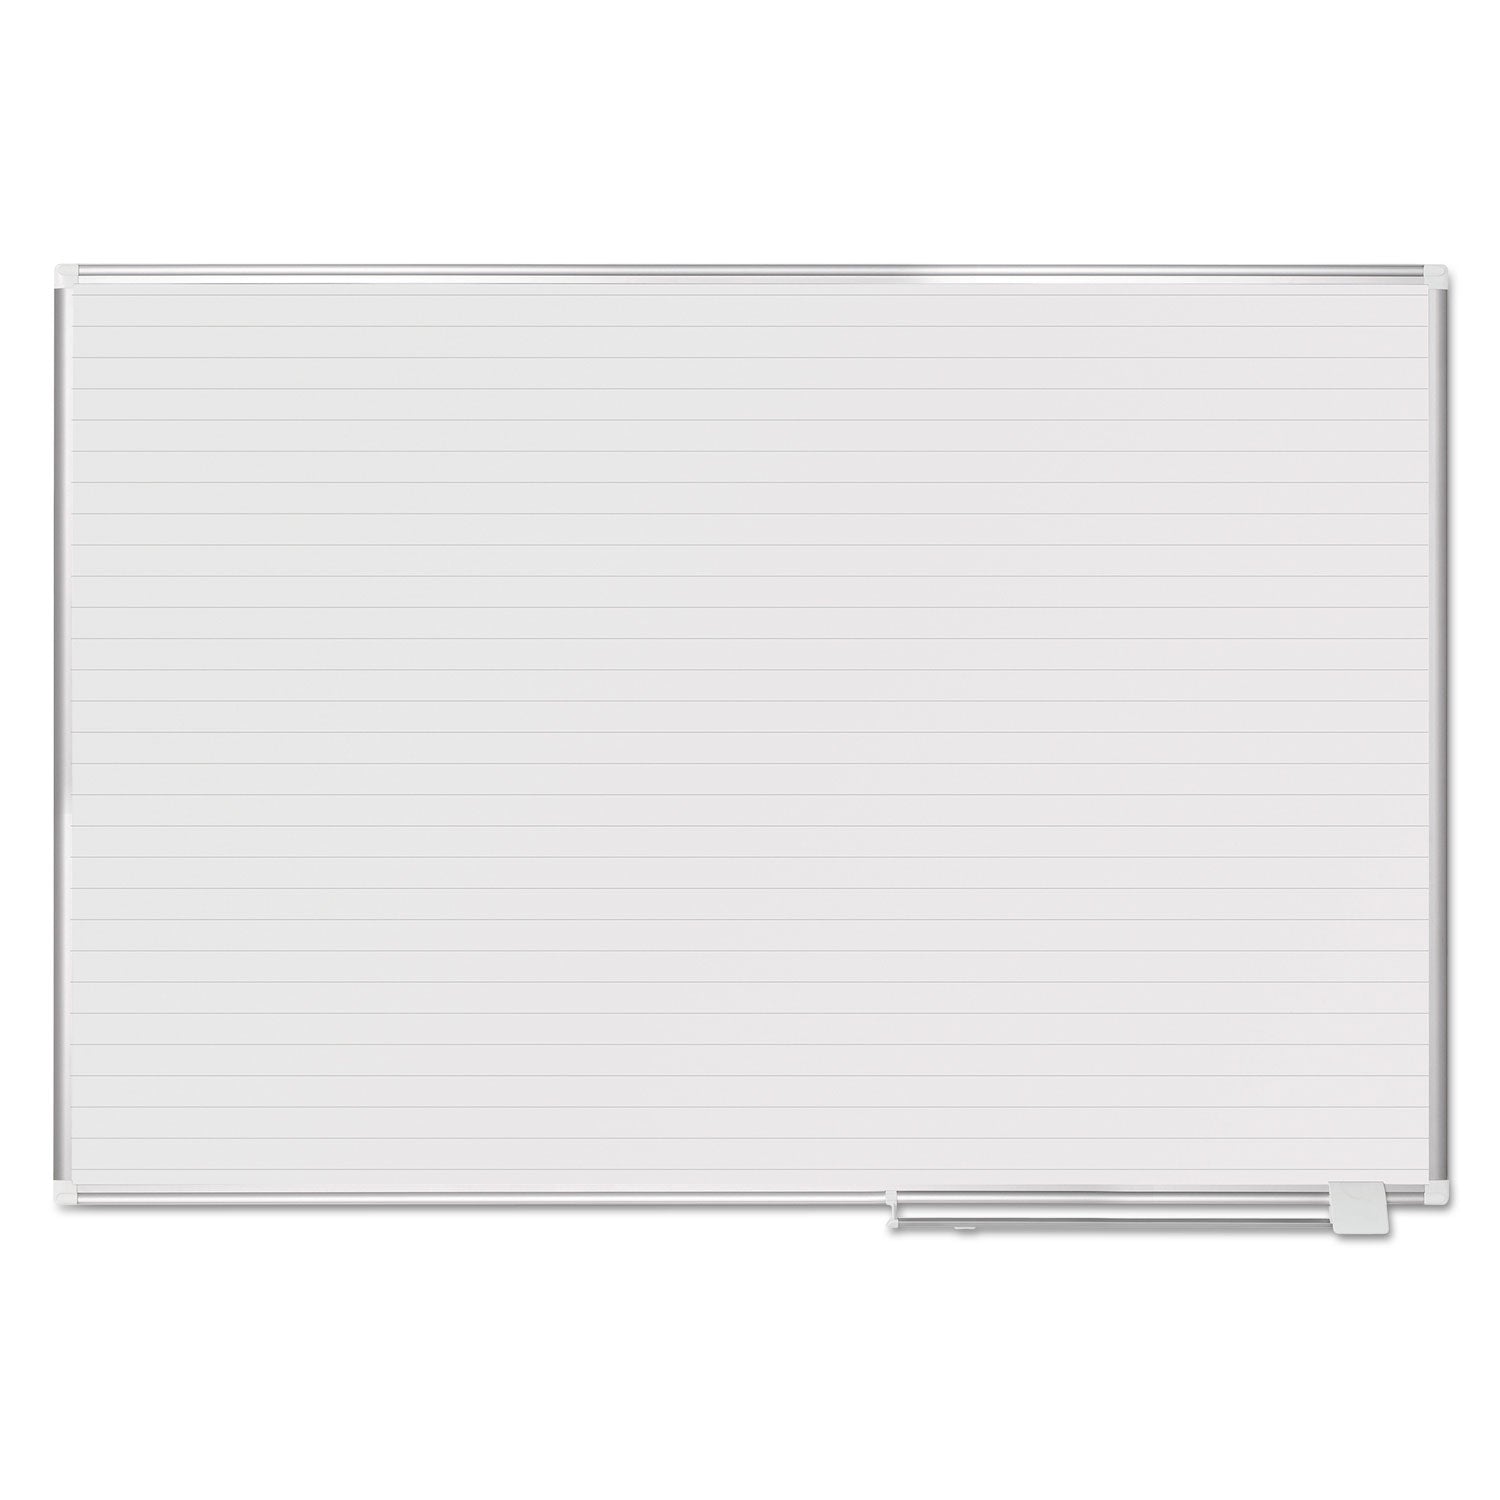 Ruled Magnetic Steel Dry Erase Planning Board, 72 x 48, White Surface, Silver Aluminum Frame - 